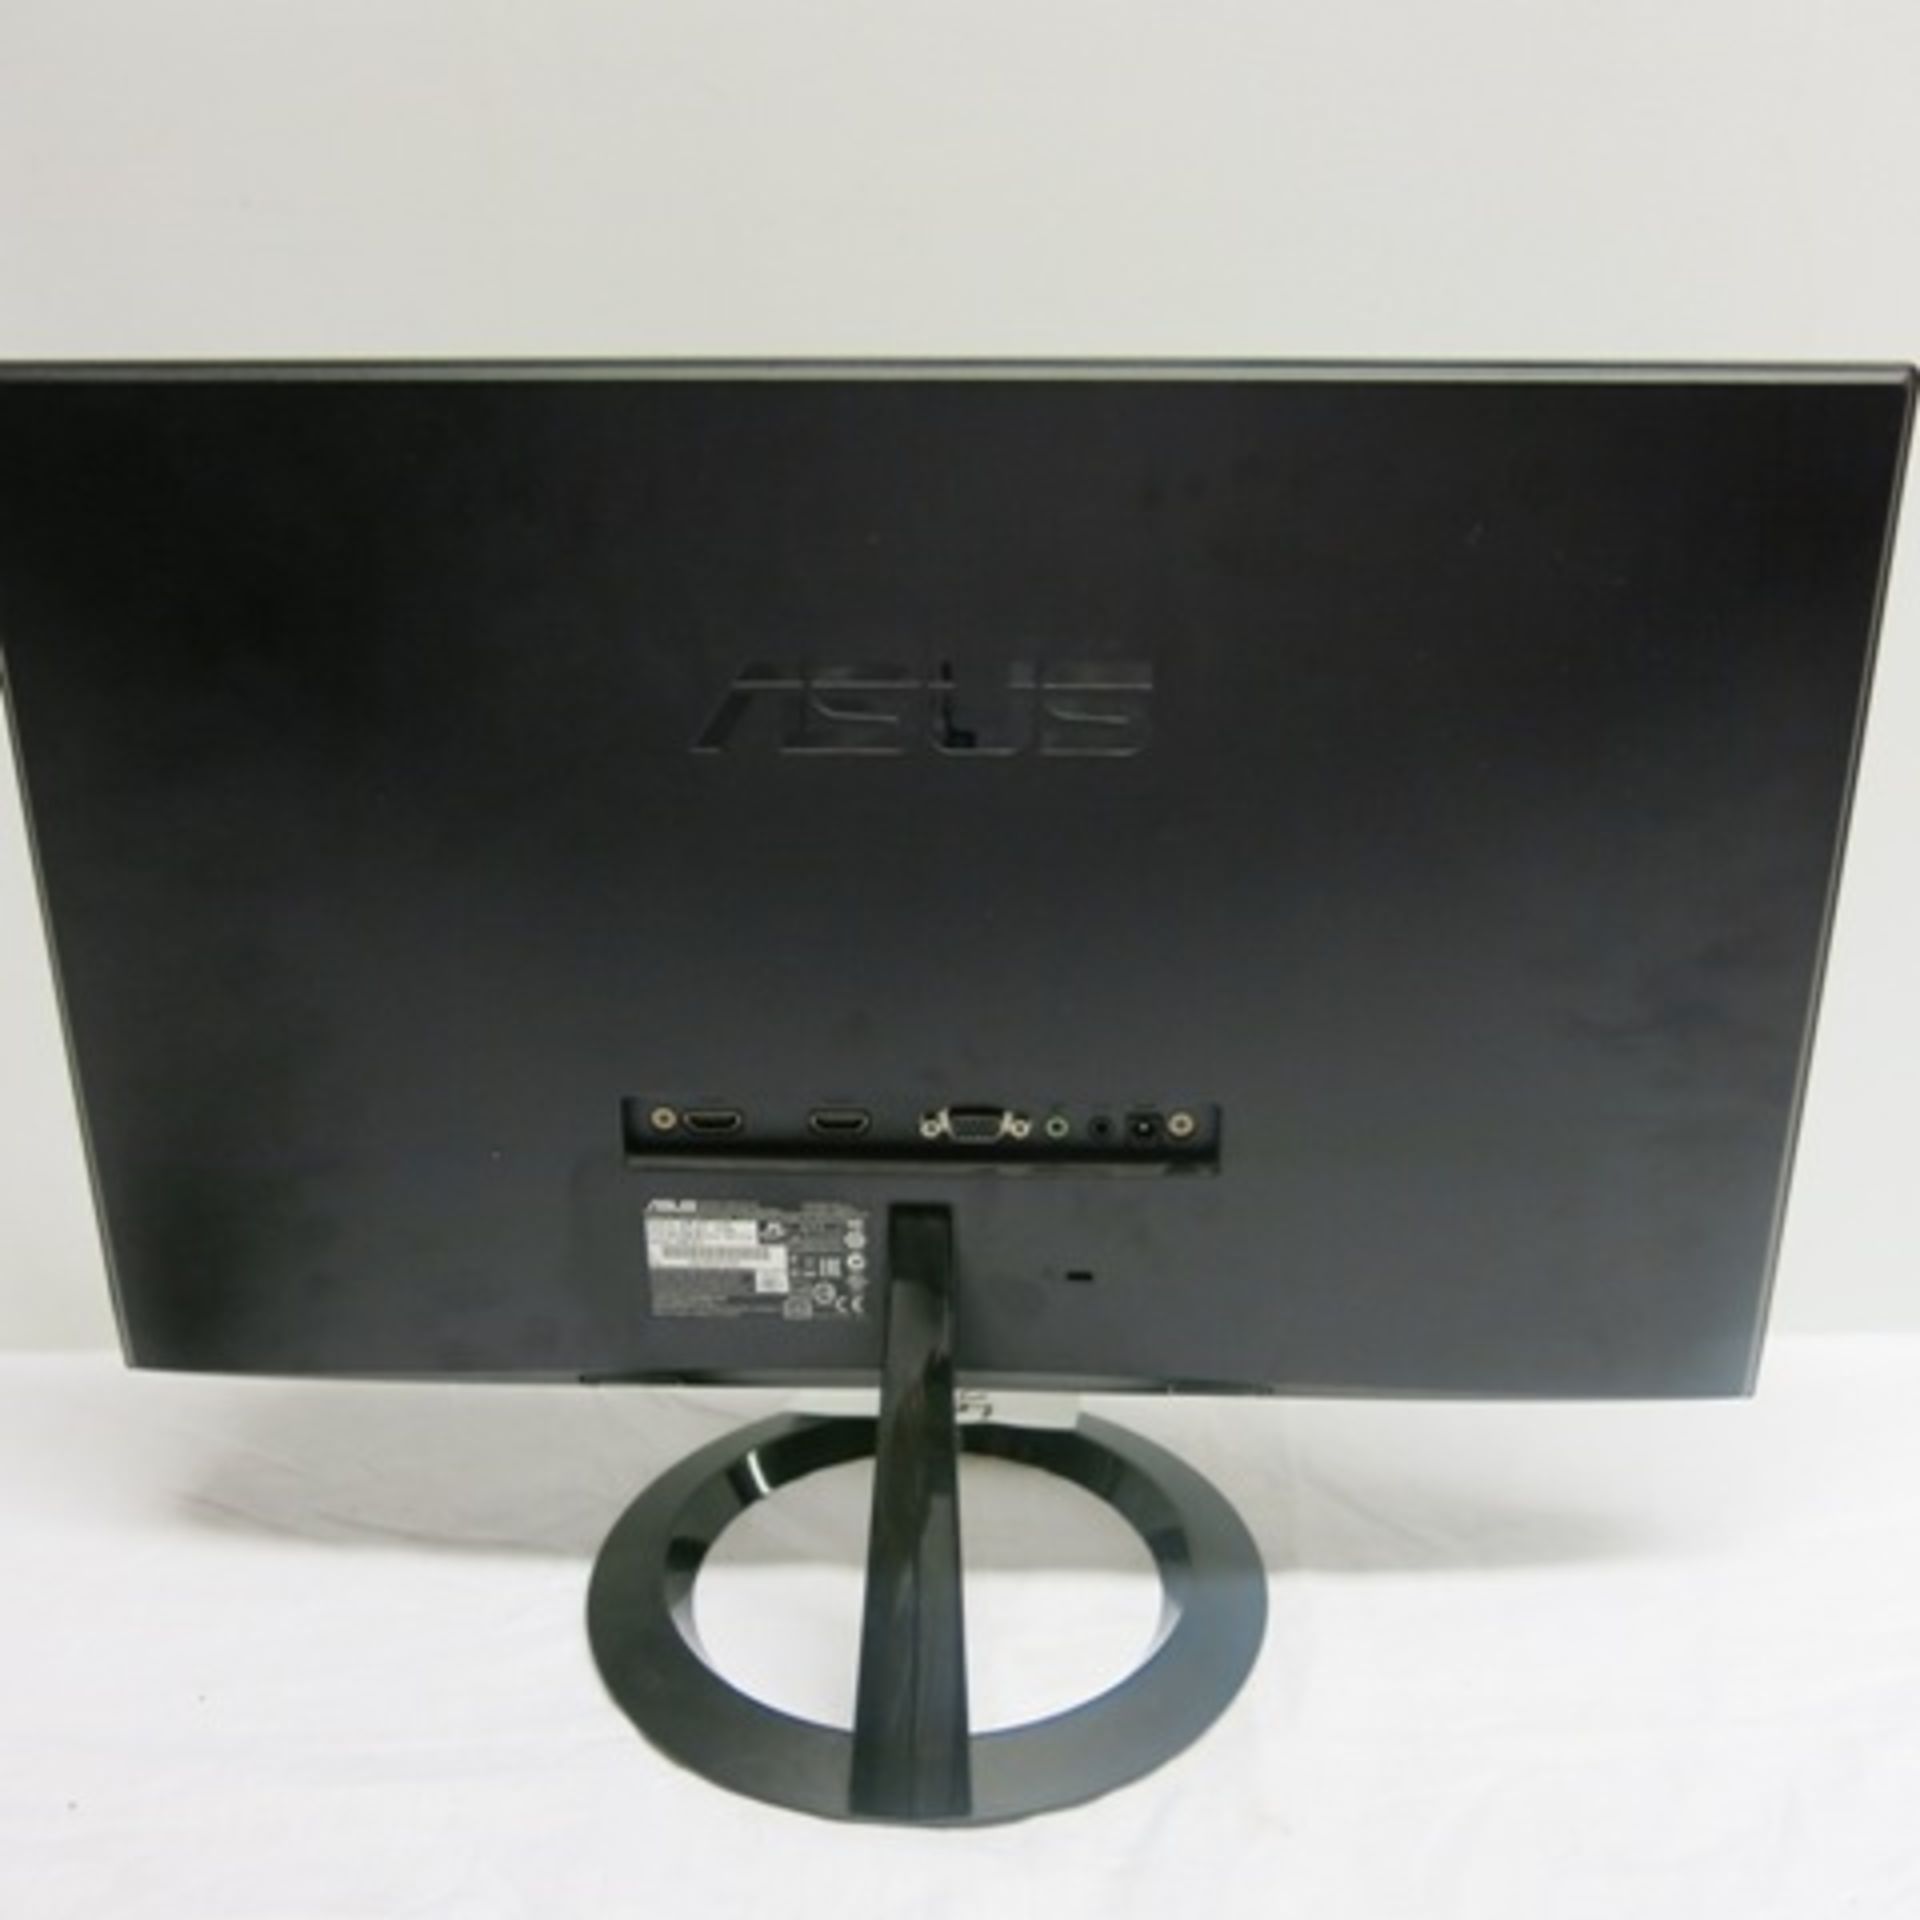 Asus 22" LCD Monitor, Model VX229 with Power Supply - Image 2 of 2